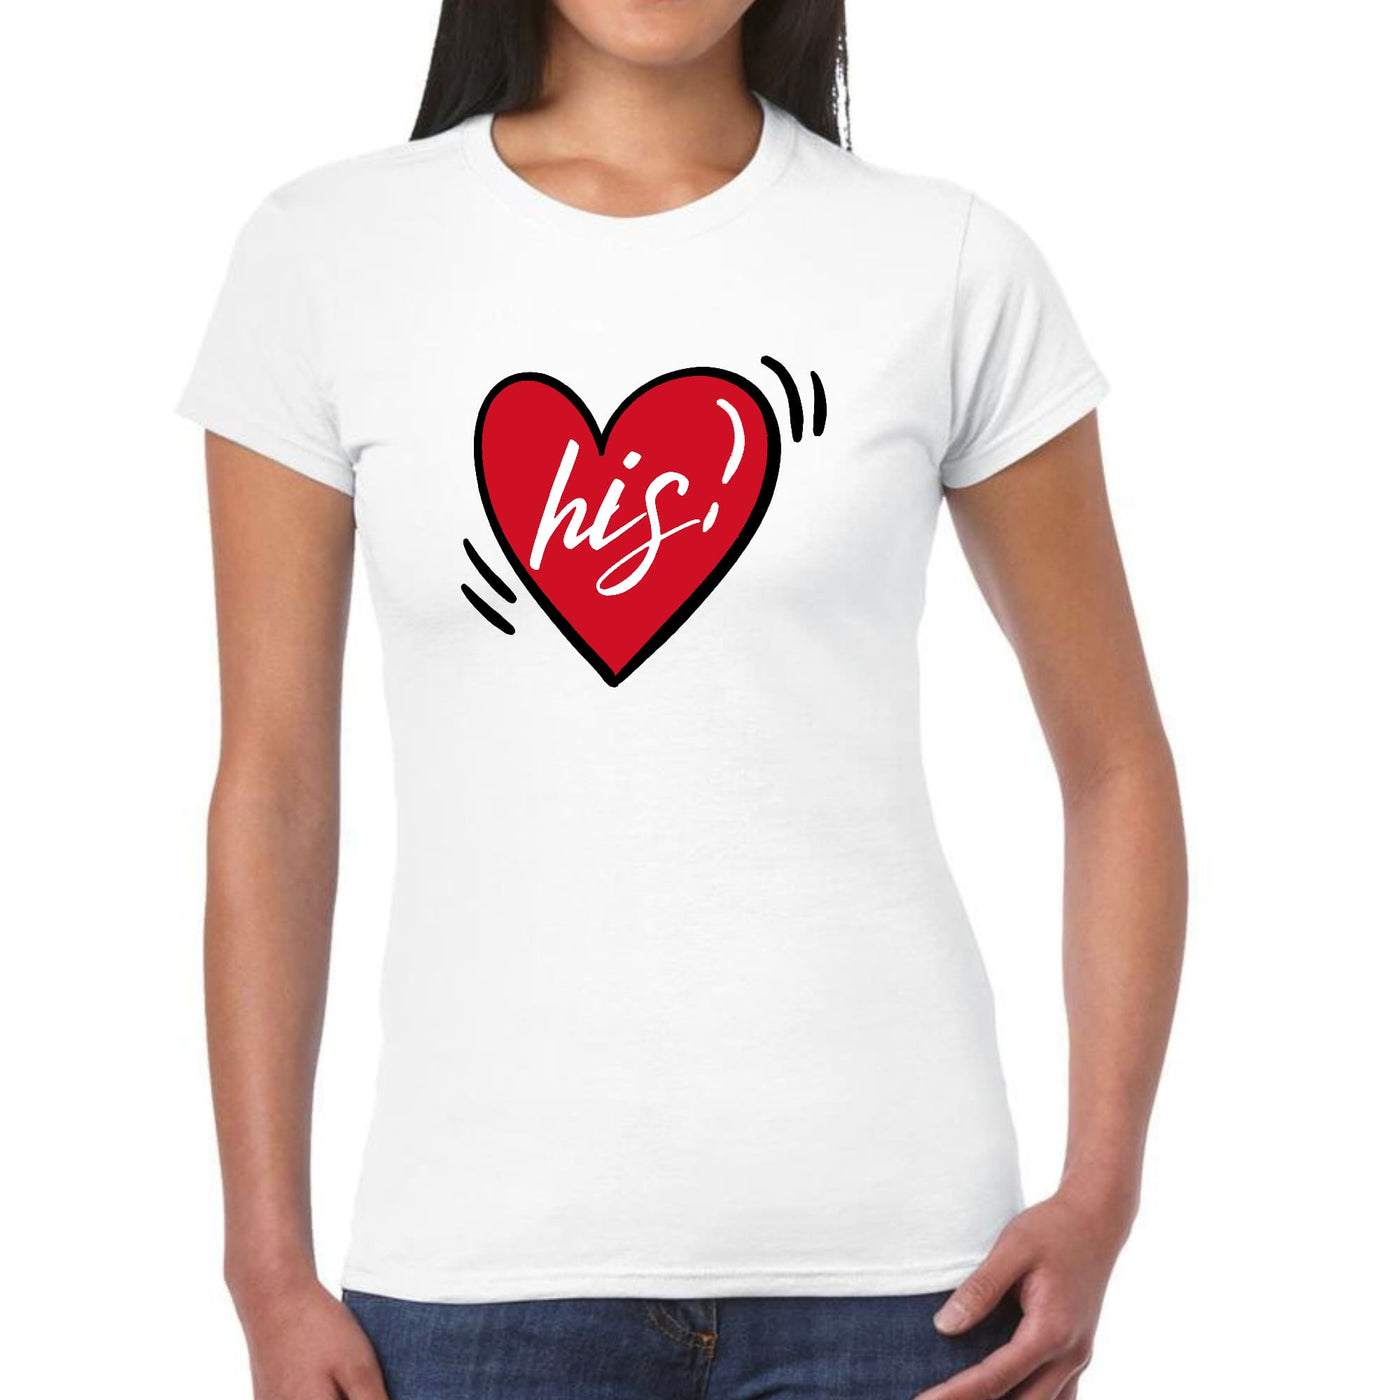 Womens Graphic T - shirt Say It Soul His Heart Couples - T - Shirts